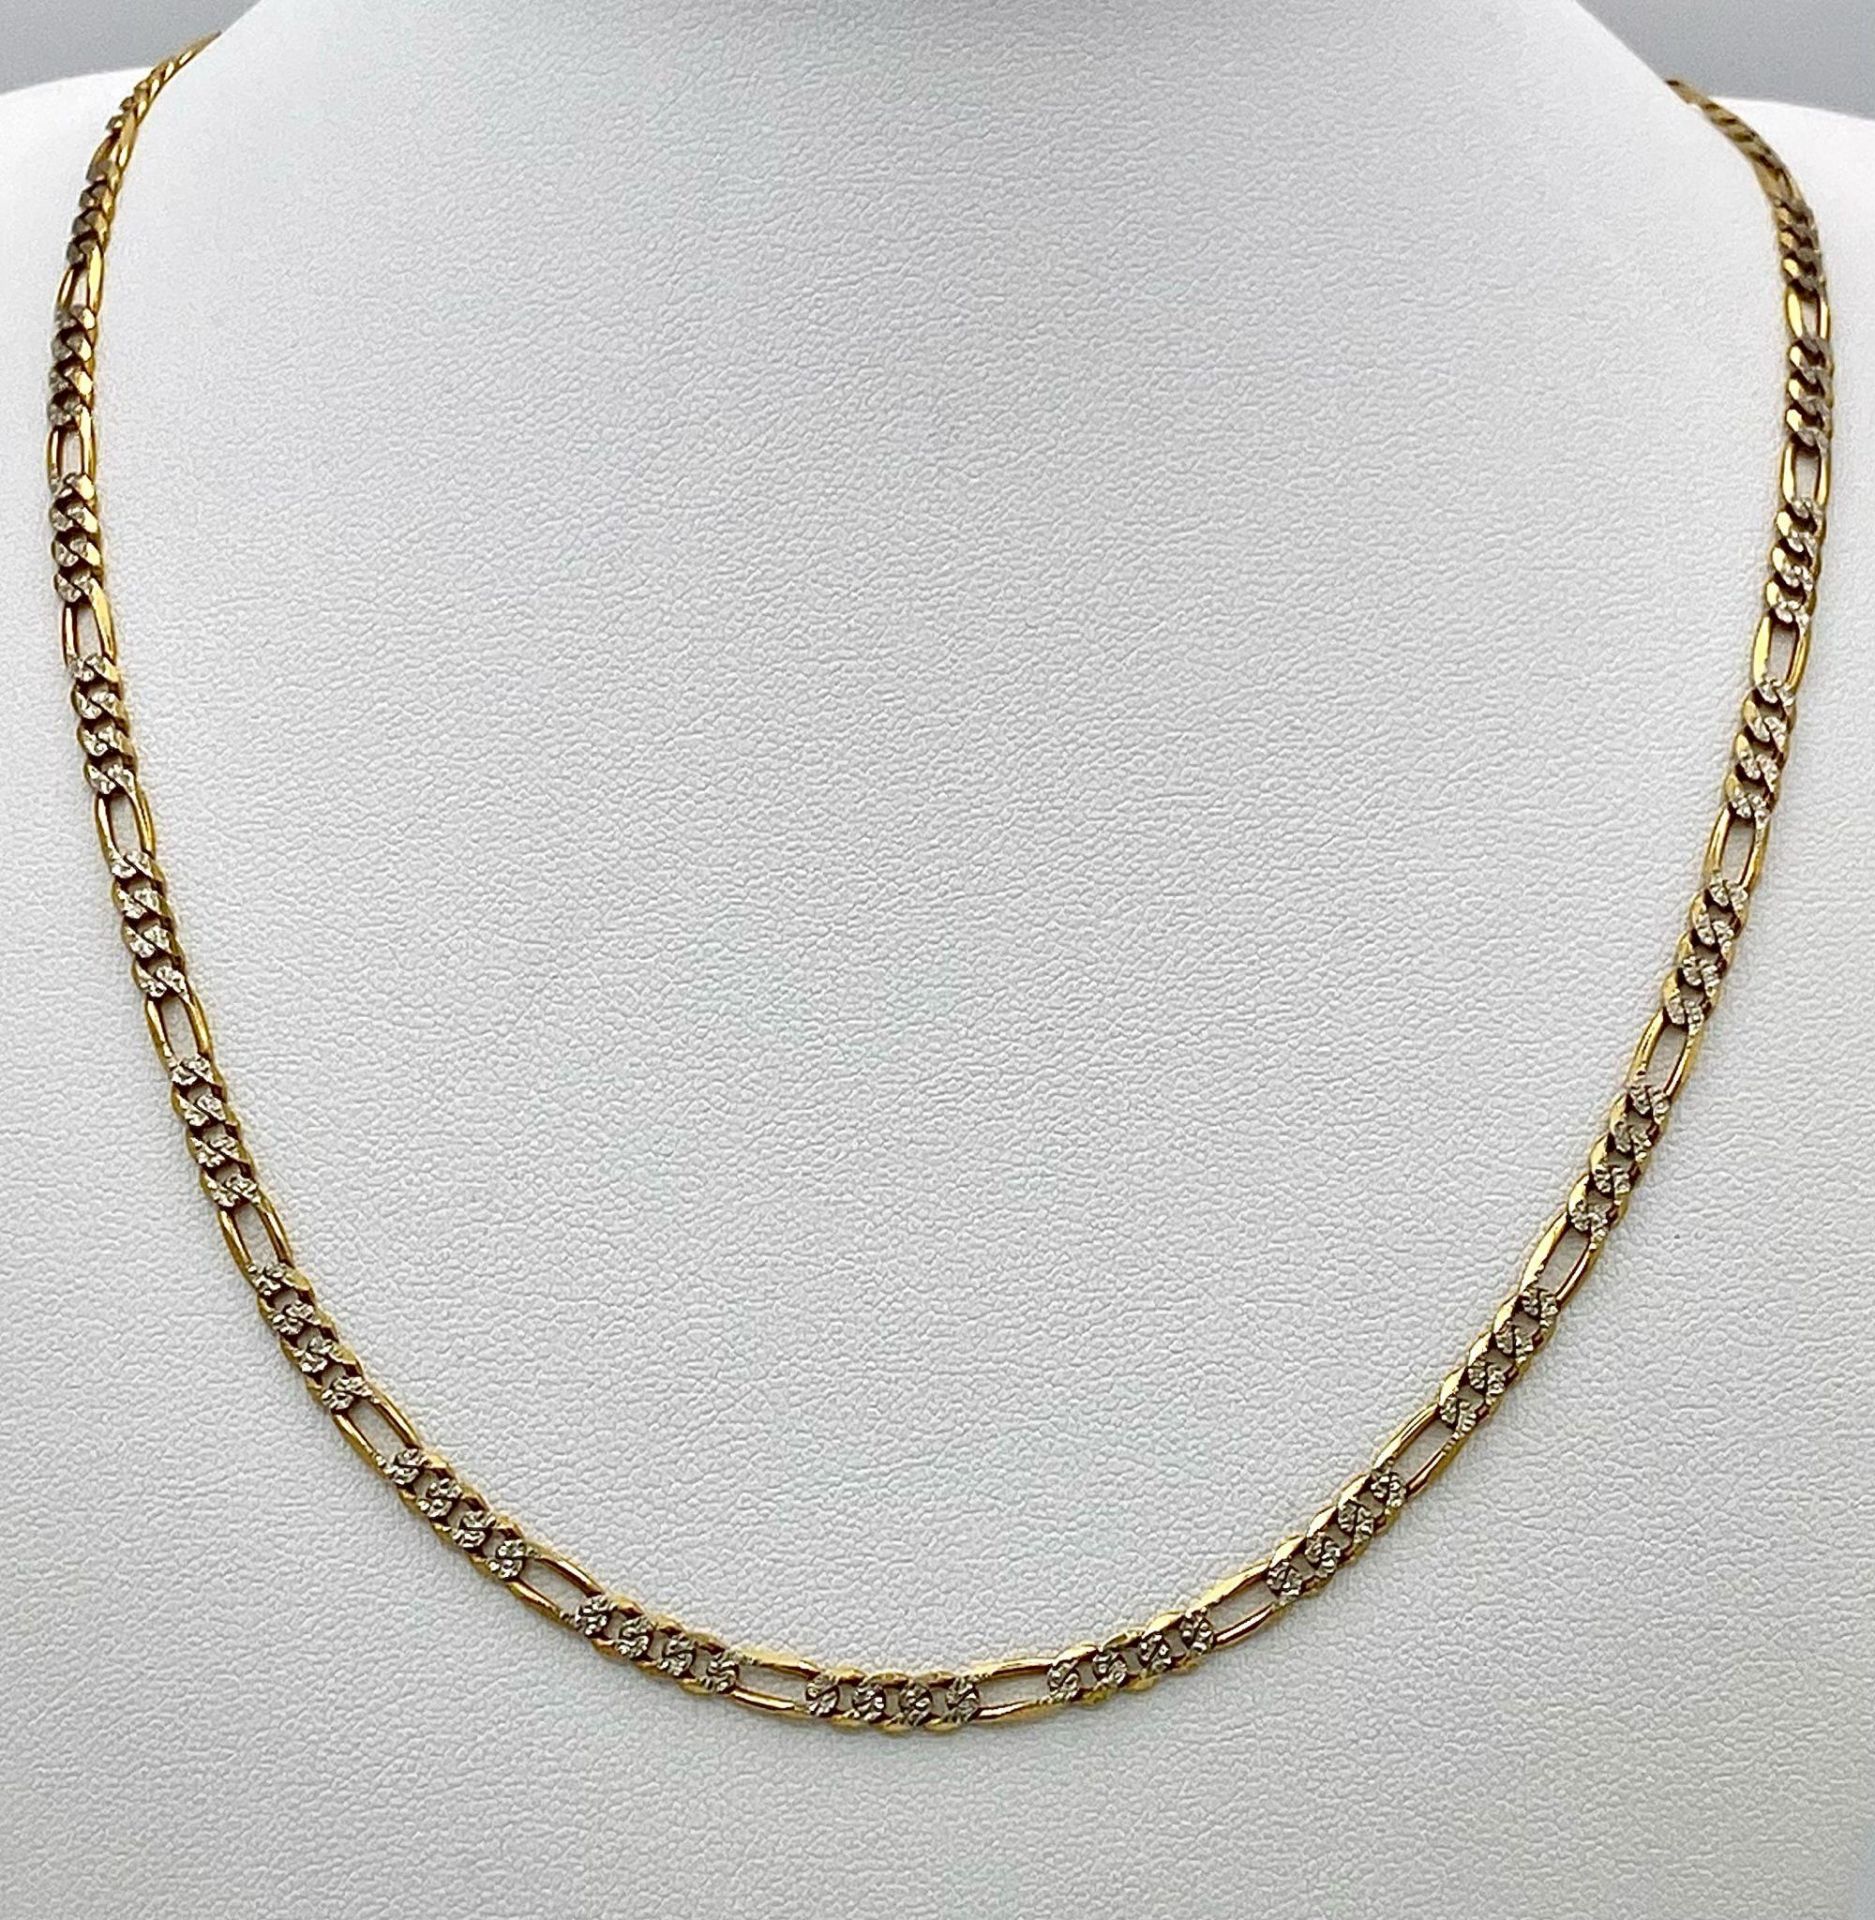 A 9K Yellow and White Gold Italian Figaro Link Necklace. 45cm length. 8.82g weight.